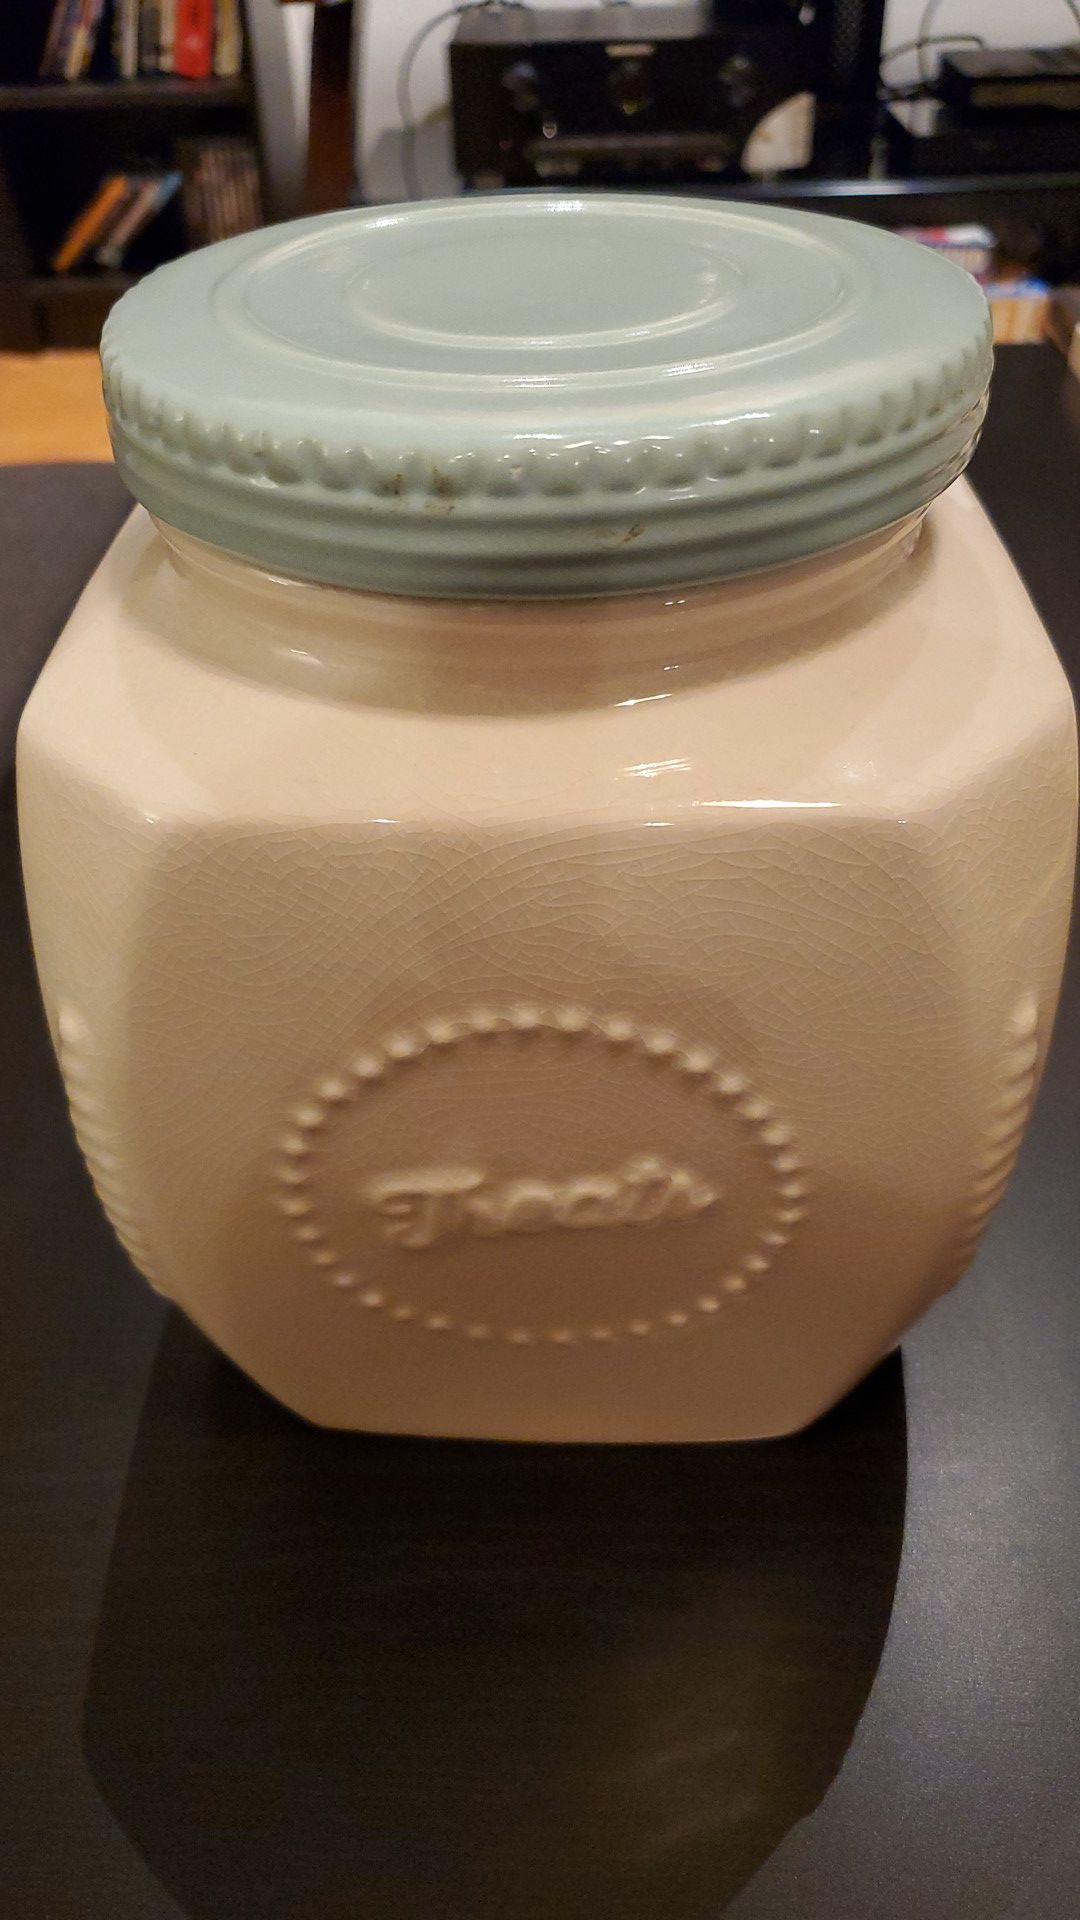 Ceramic cookie (Treat) jar, with silicone seal on the lid to keep in freshness.